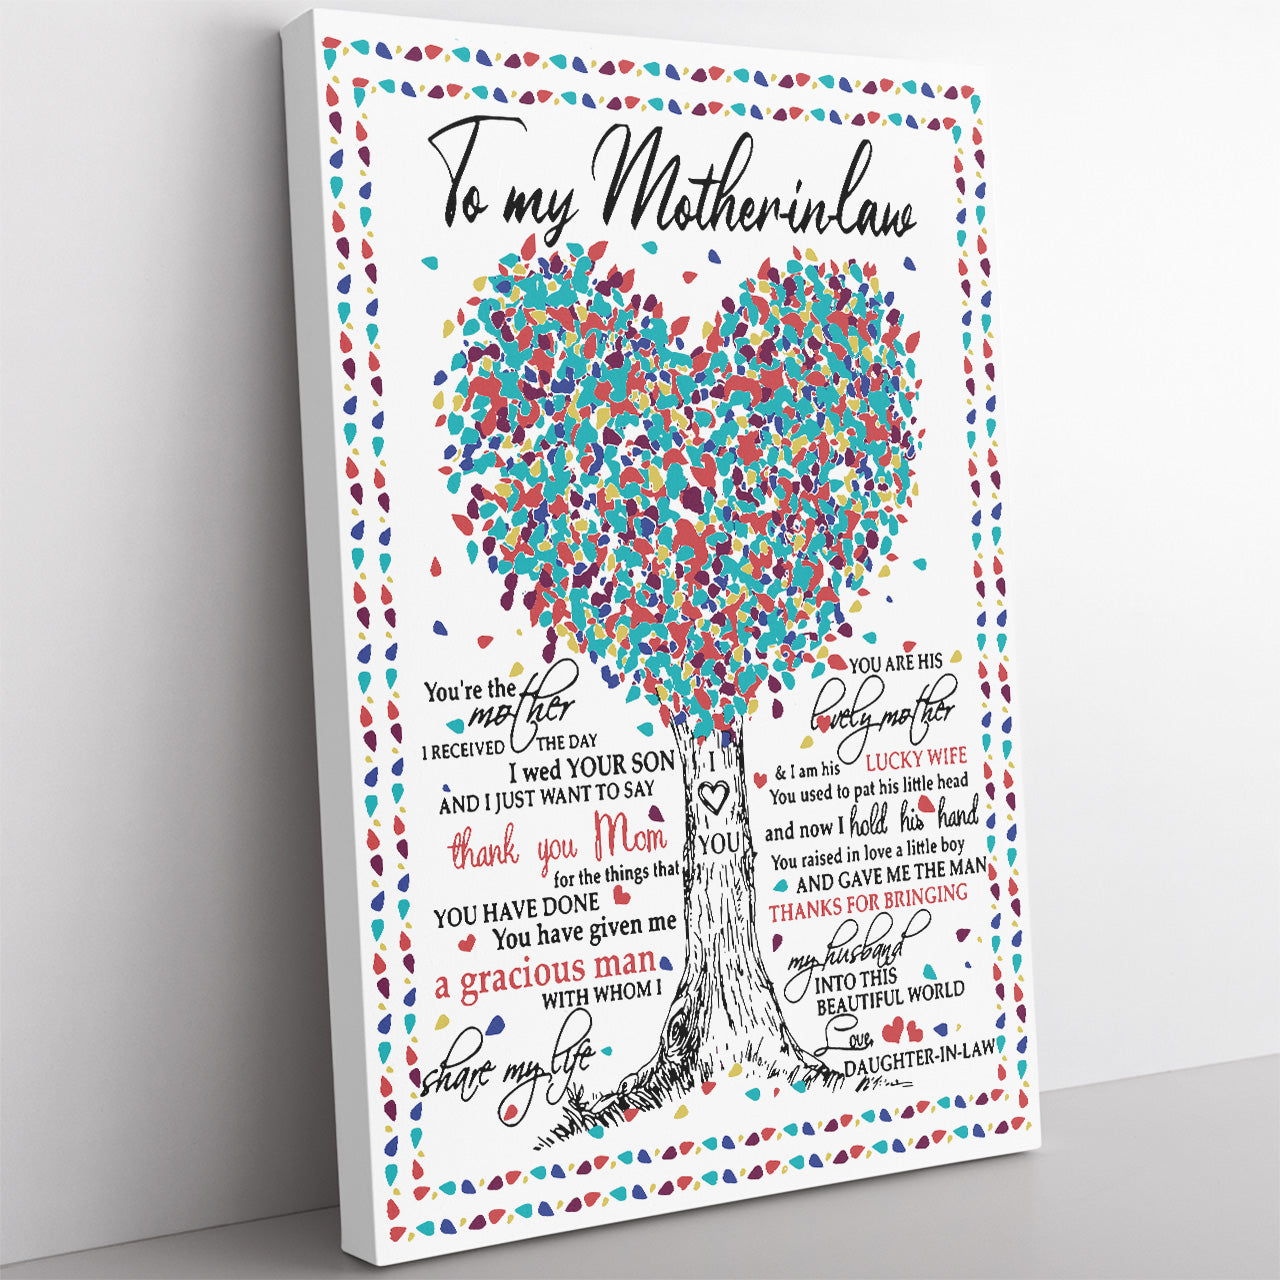 Canvas Gift Ideas For Mom in Law, Custom Personalized Canvas Gift, Tree of Life